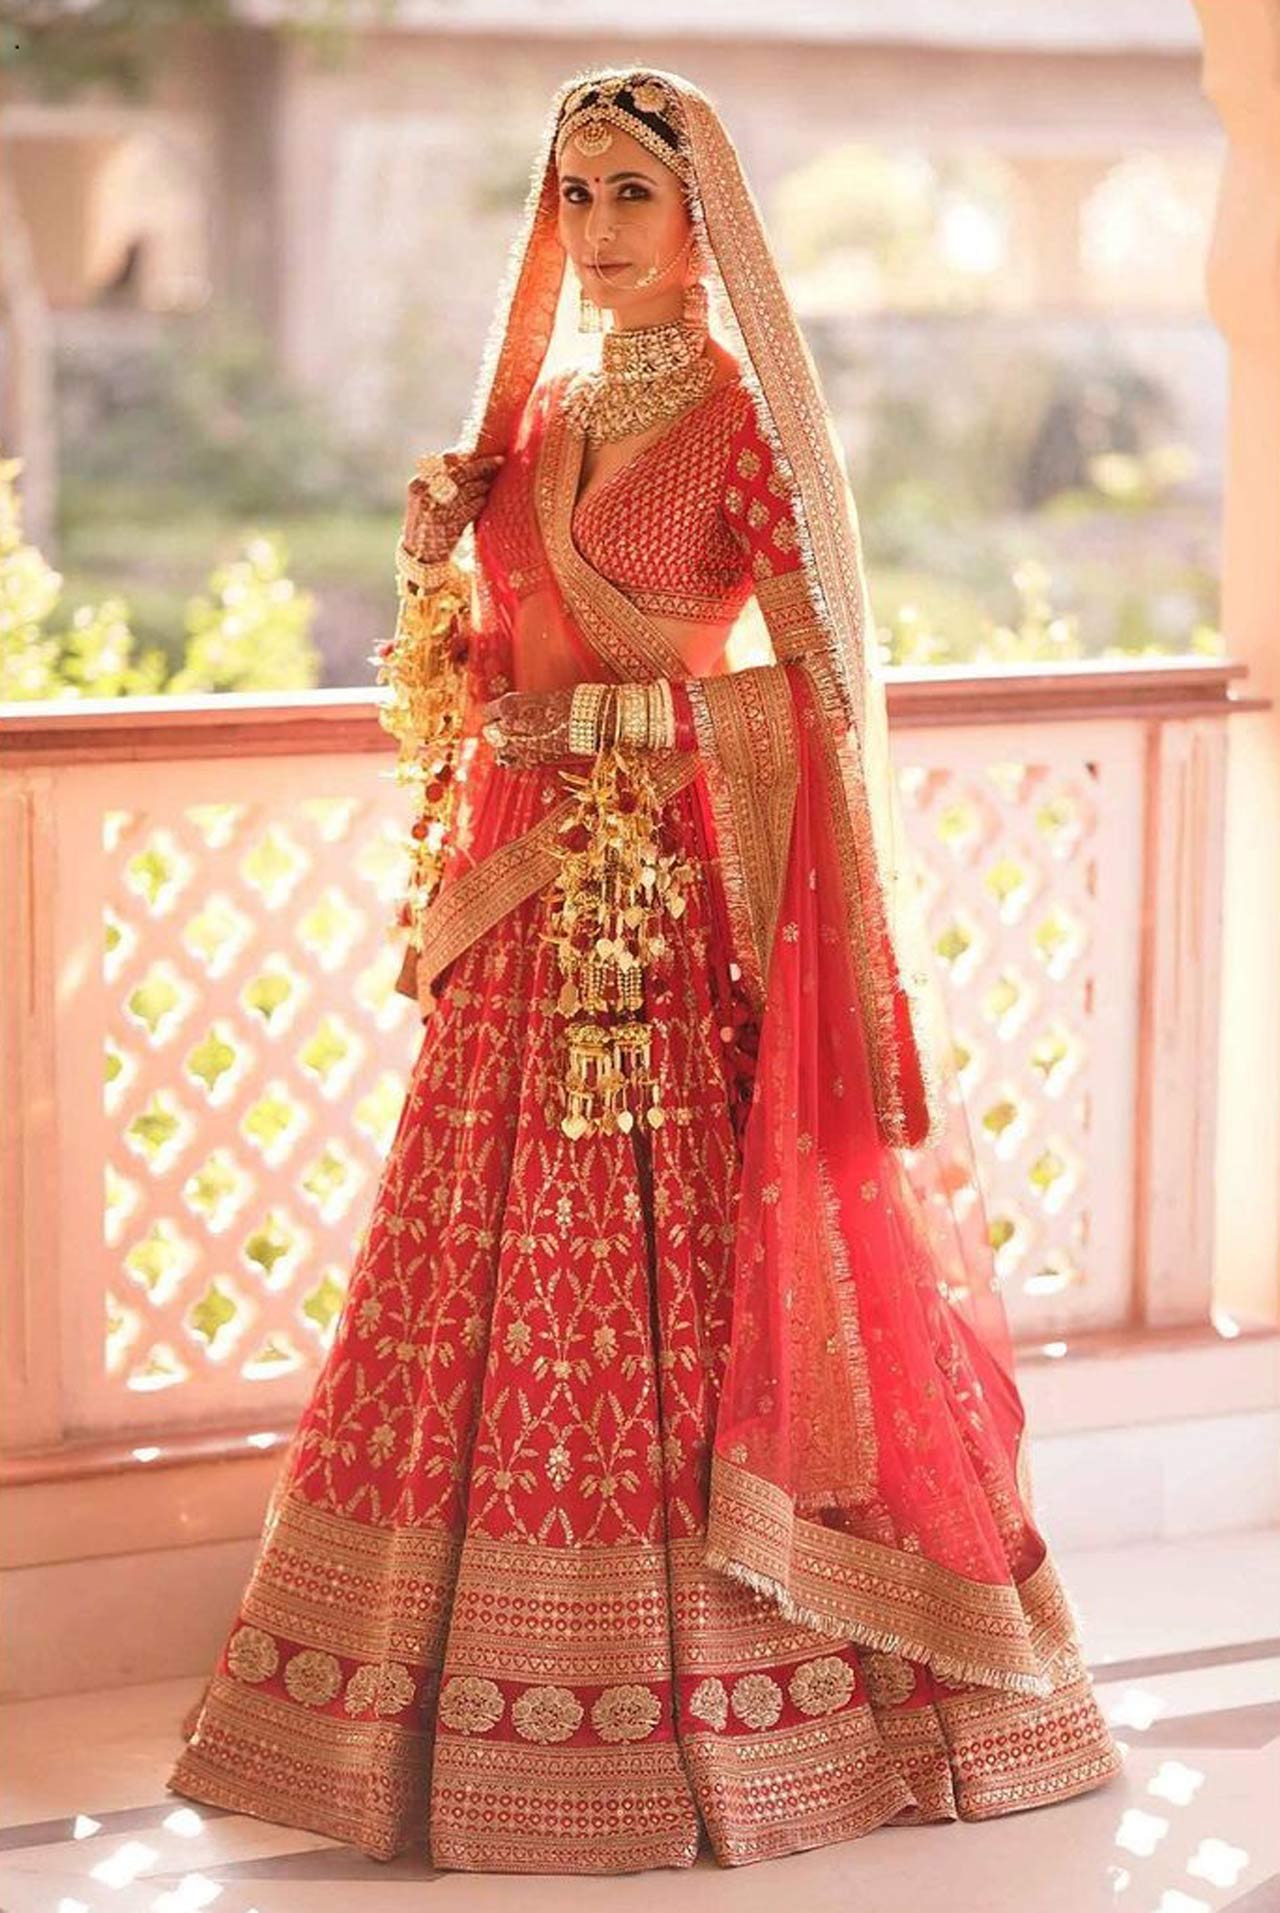 In homage to Vicky Kaushal's Punjabi roots, Katrina's veil was custom-trimmed with handmade kiran. The lehenga was paired with bespoke bridal jewellery of uncut diamonds in 22k gold with hand-strung pearls from Sabyasachi Heritage Jewellery.